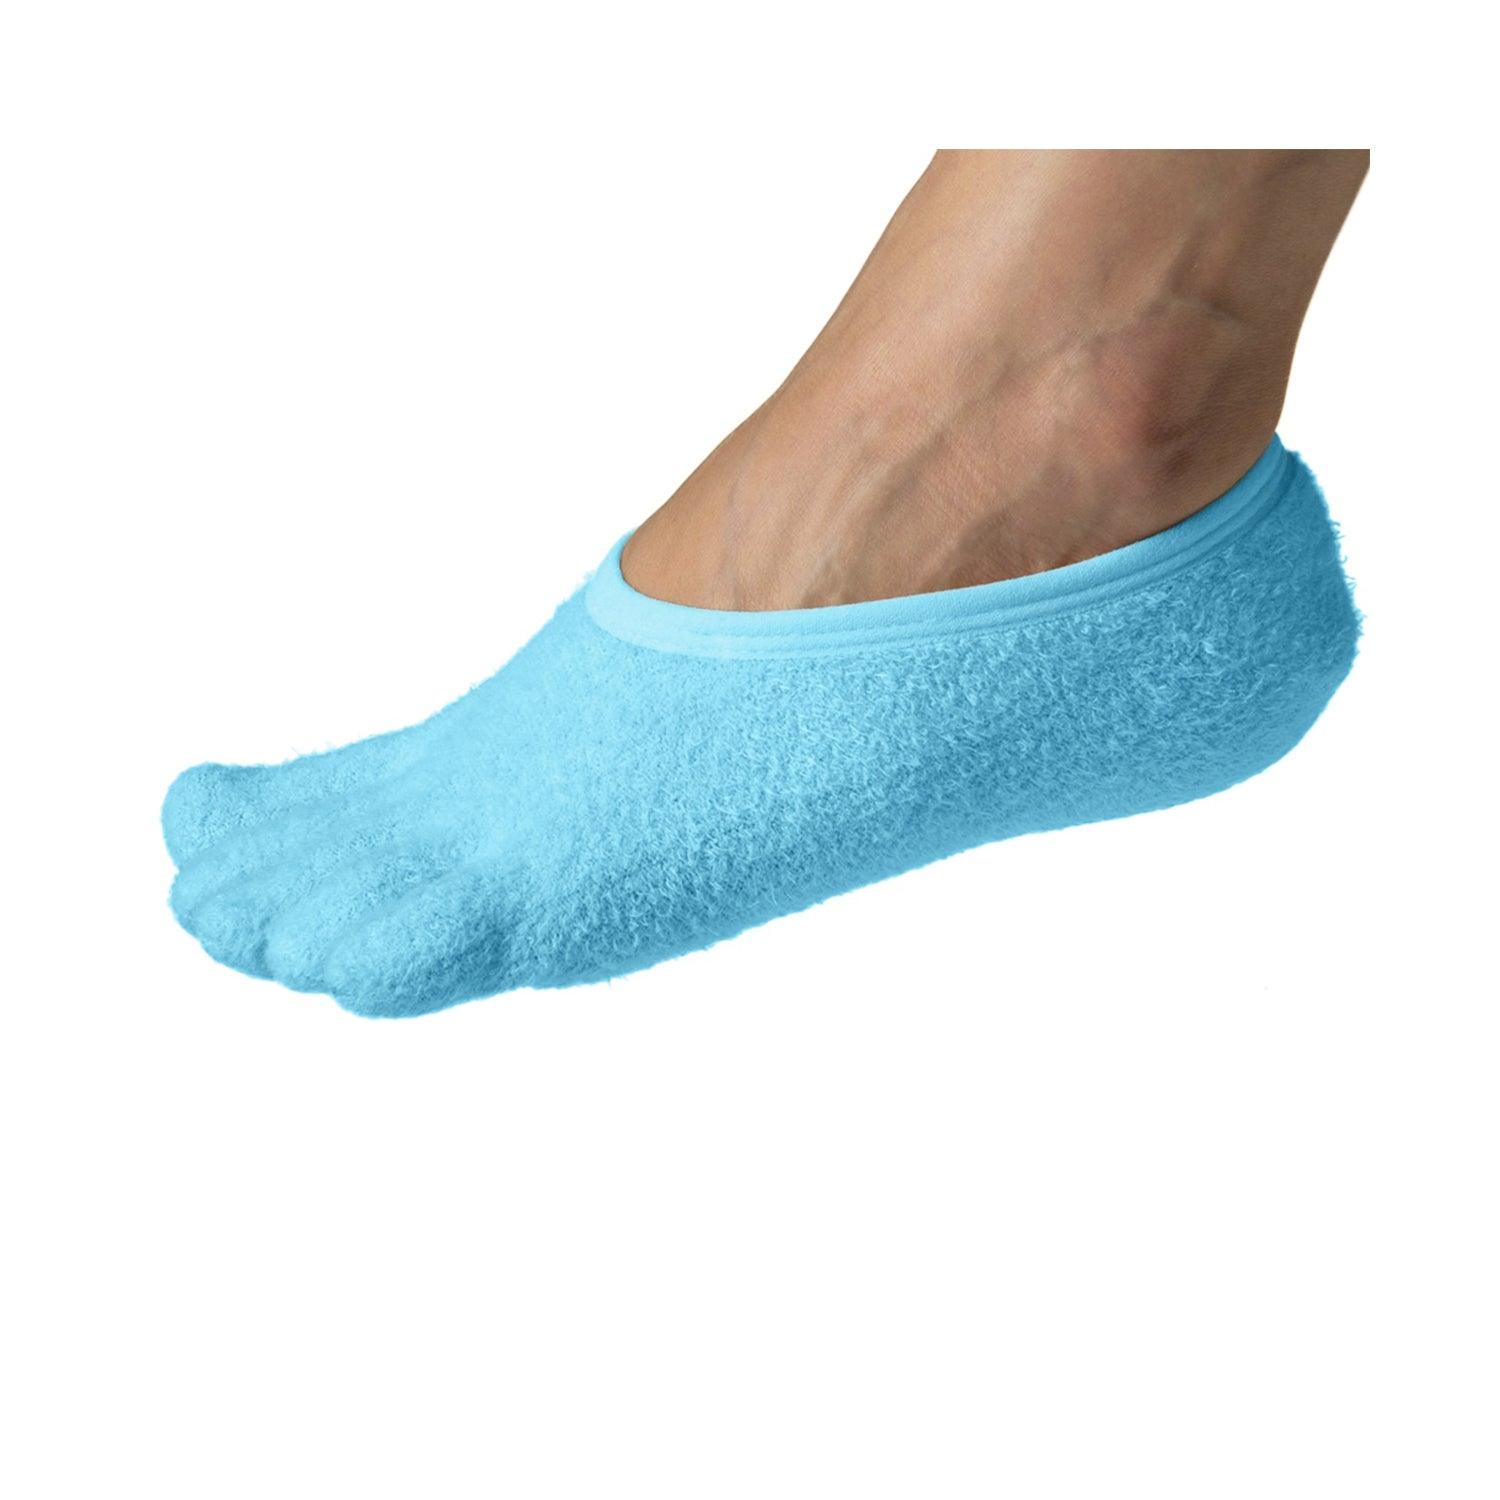 NatraCure 5-Toe Gel Moisturizing Socks (Helps Dry Feet, Cracked Heels,  Calluses, Cuticles, Rough Skin, and Enhances your Favorite Lotions and  Creams)